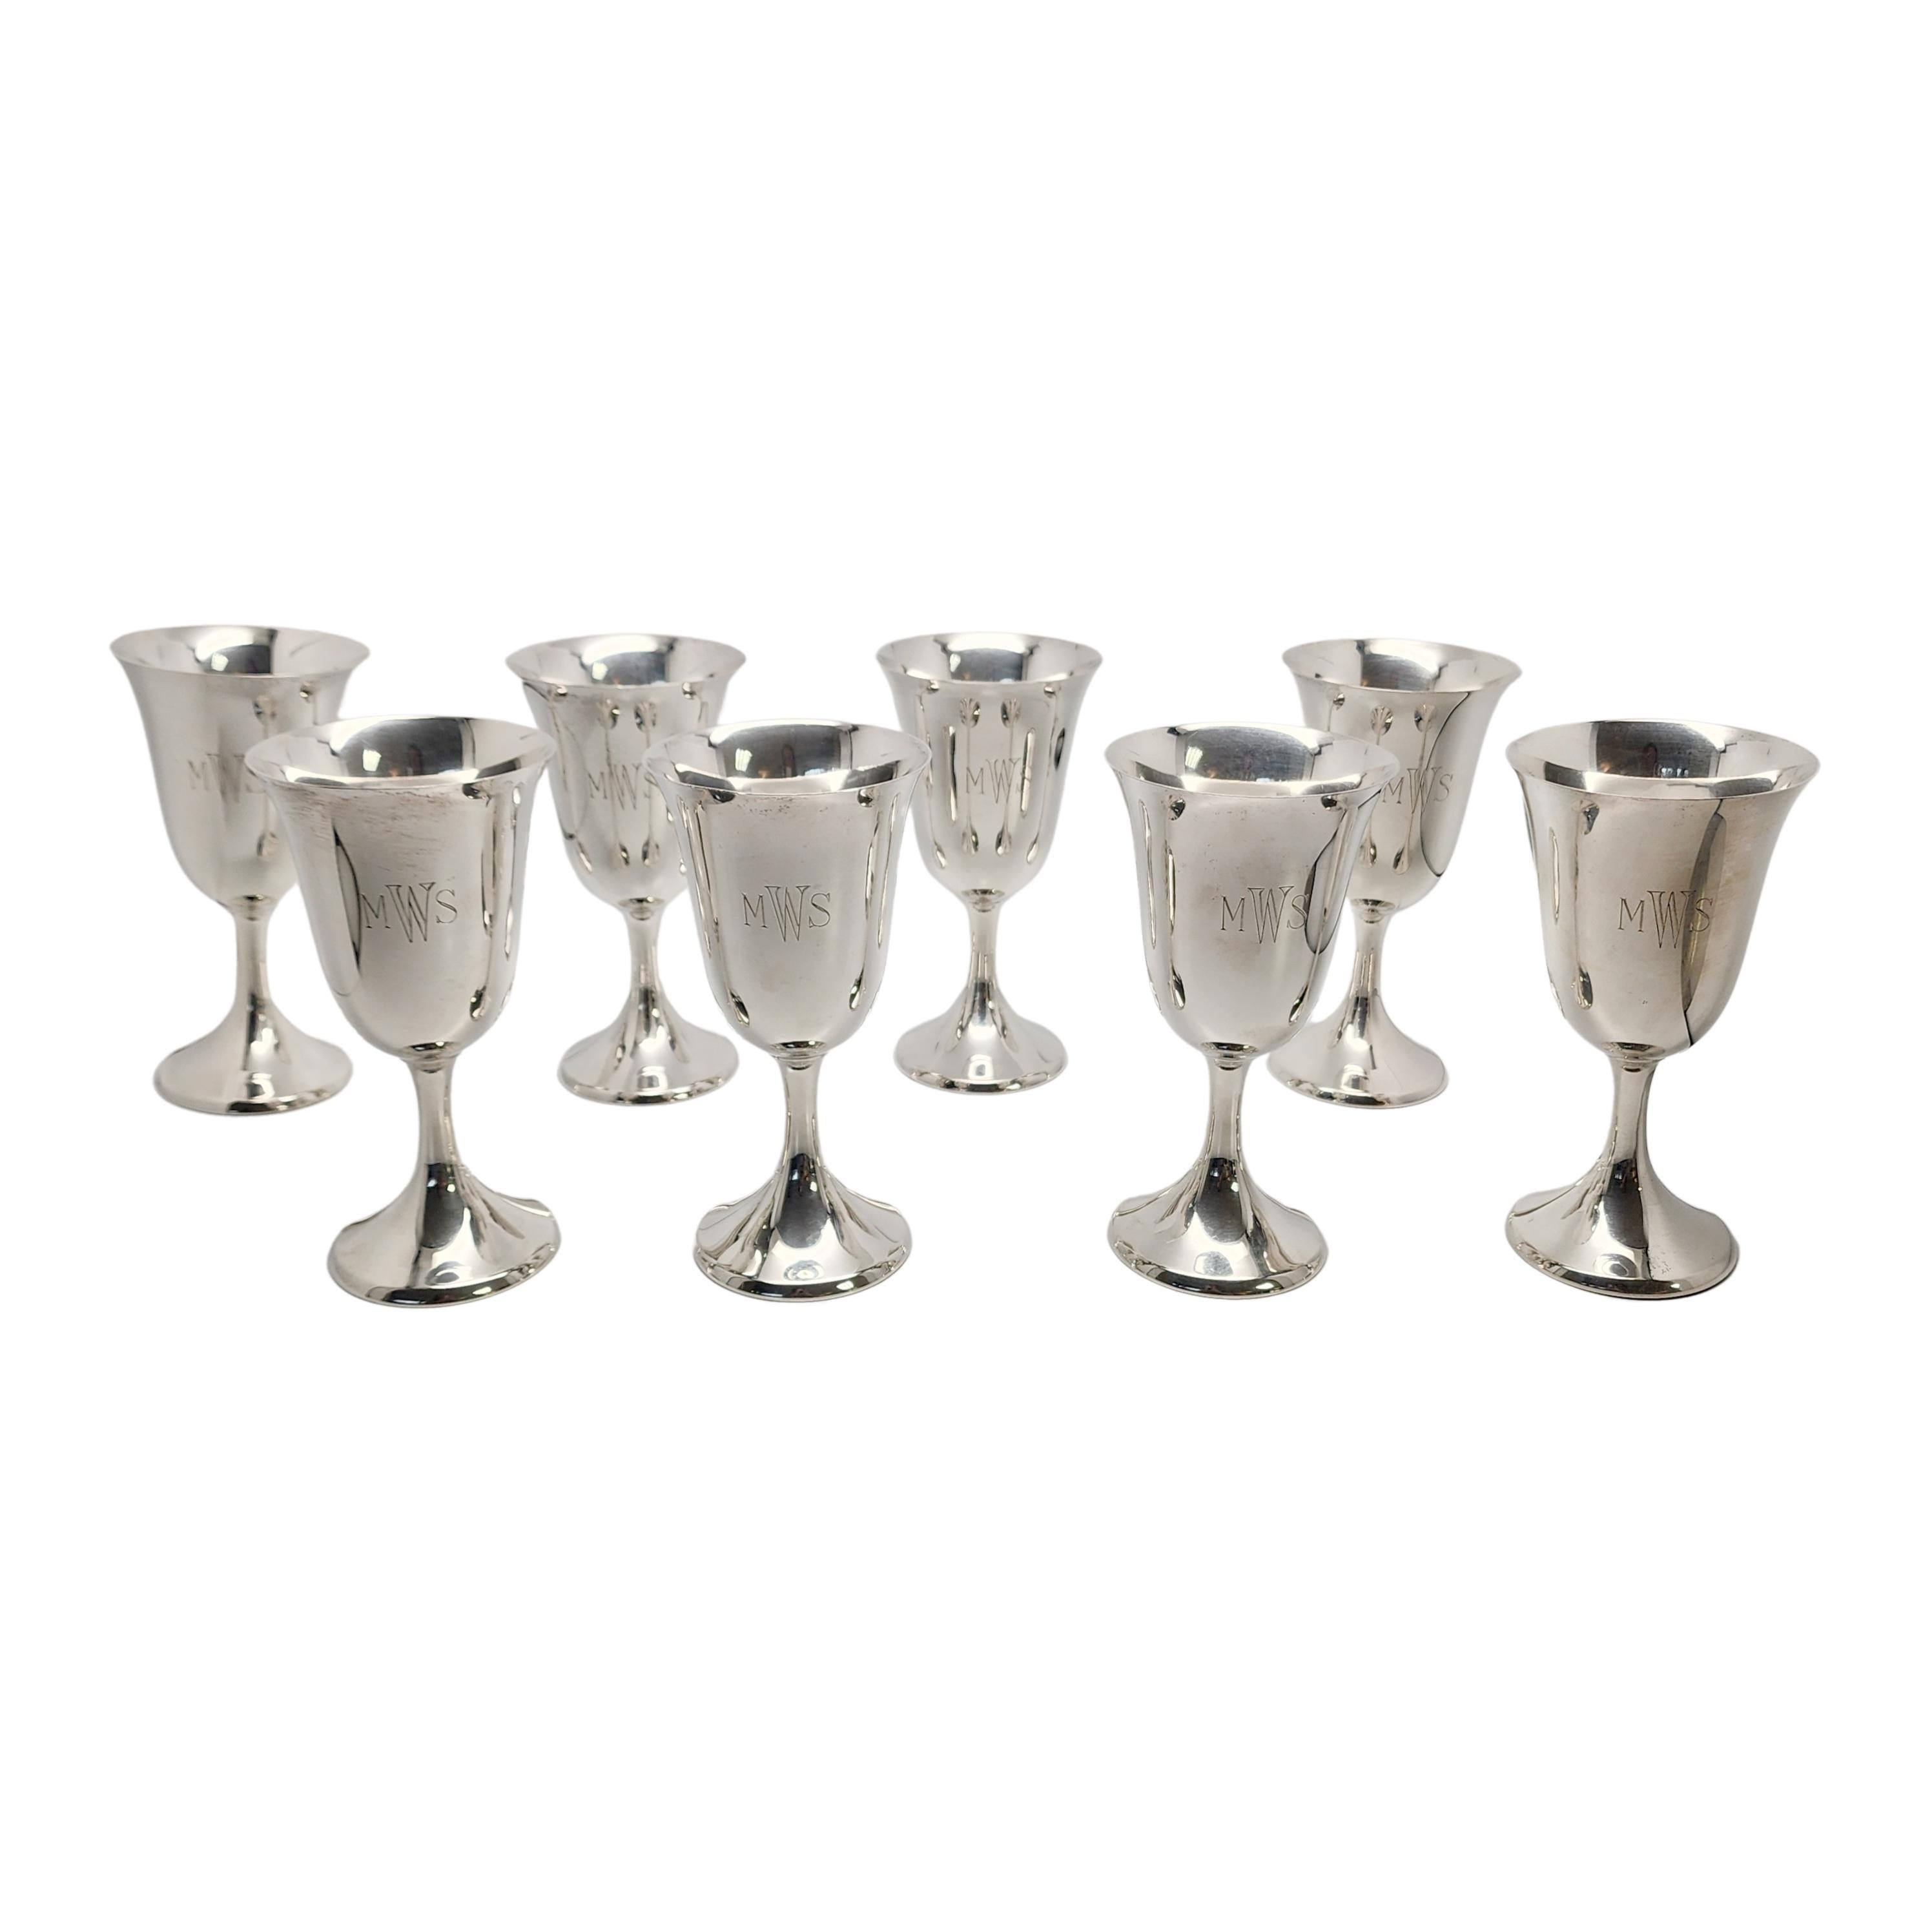 Set of 8 sterling silver water goblets by Cartier.

Engraving appears to be MWS on each goblet (see photo).

A simple and classic polished design with a long deep cup and short stem. Slightly out-turned rim.

Measures approx 6 1/2